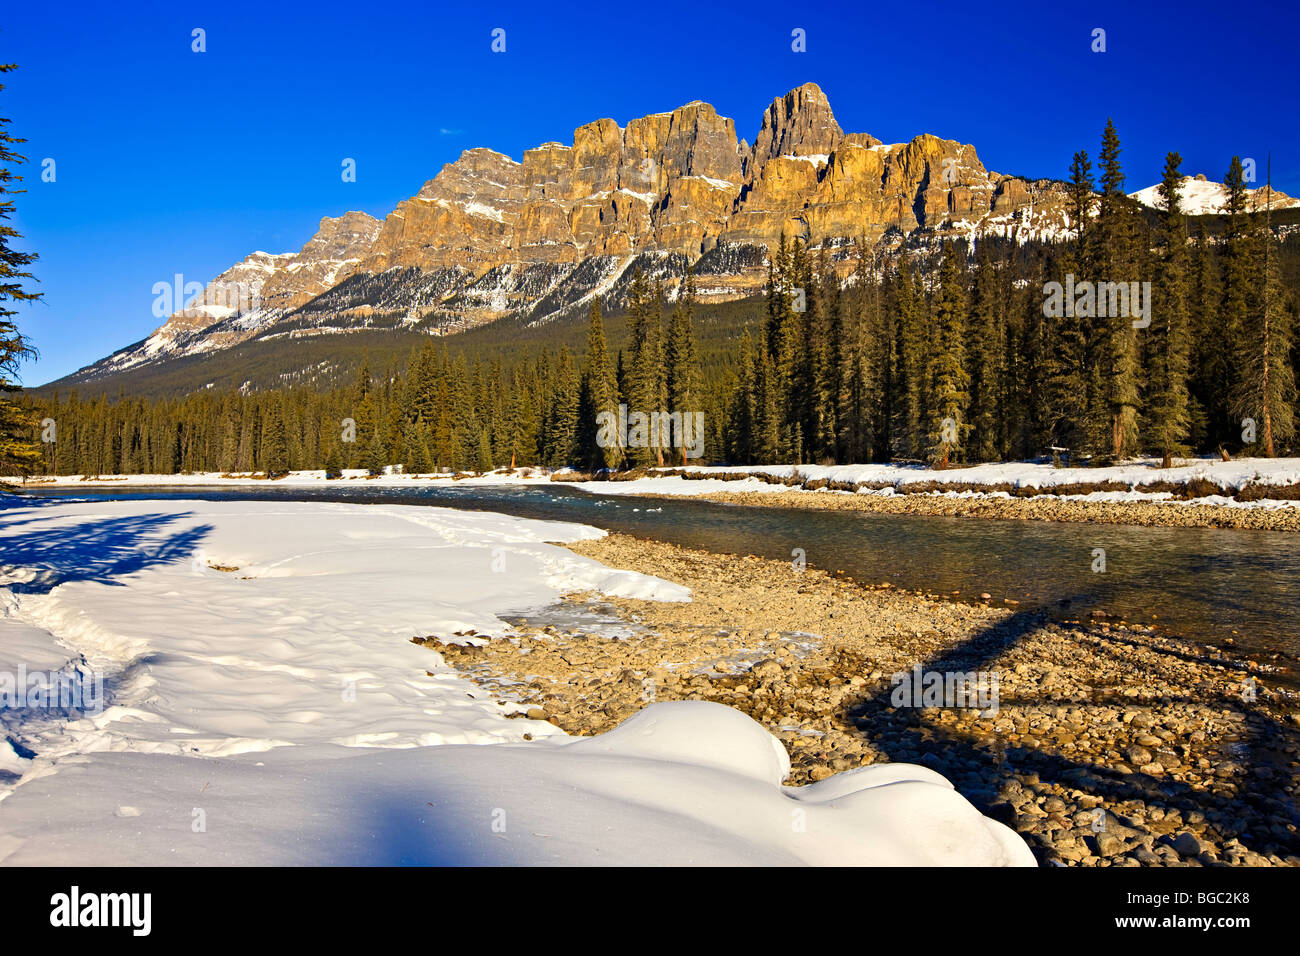 Castle Mountain (2862 metres/9390 feet), and the Bow River during late winter, Highway 93, Banff National Park, Canadian Rocky M Stock Photo